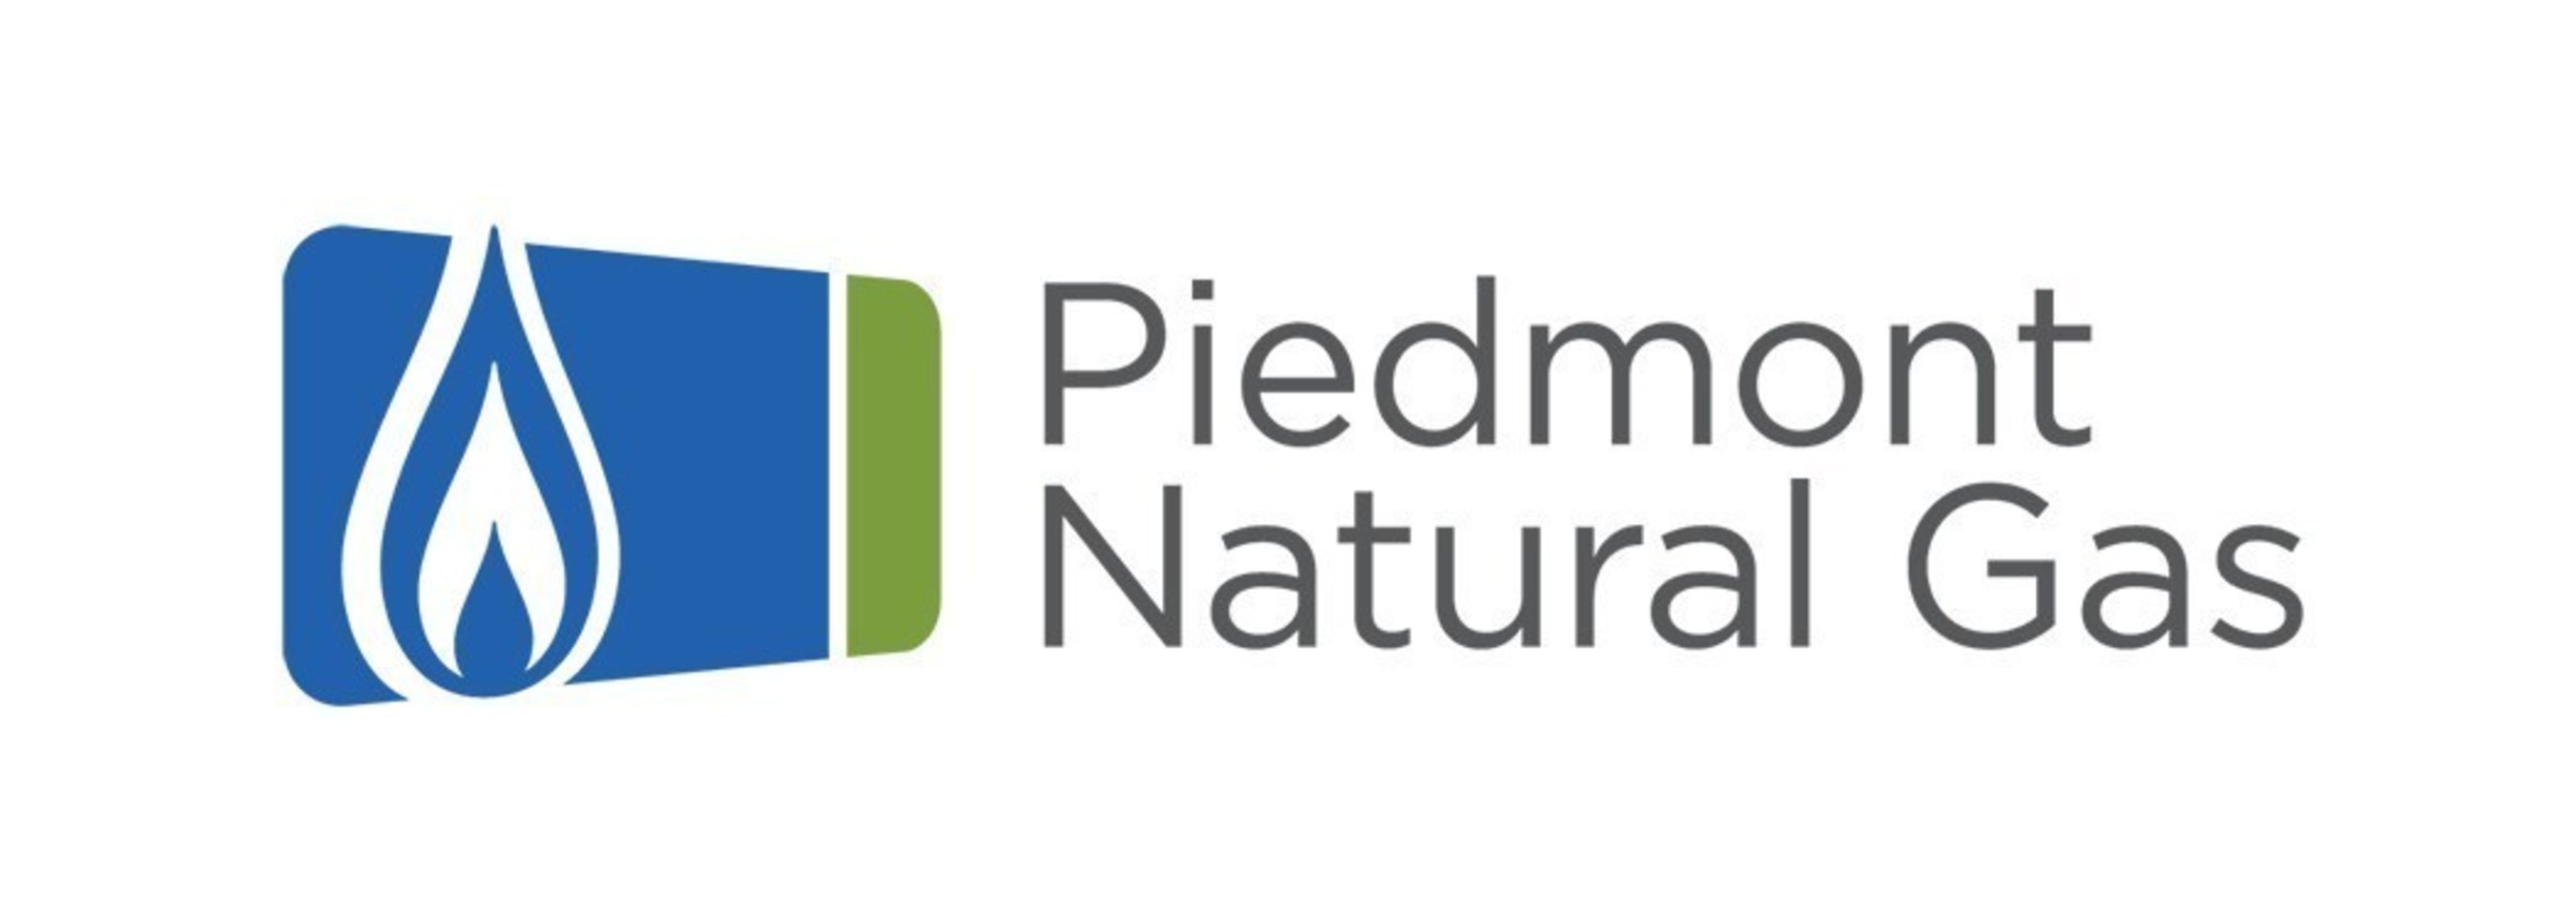 ncuc-approves-piedmont-natural-gas-request-to-decrease-rates-for-the